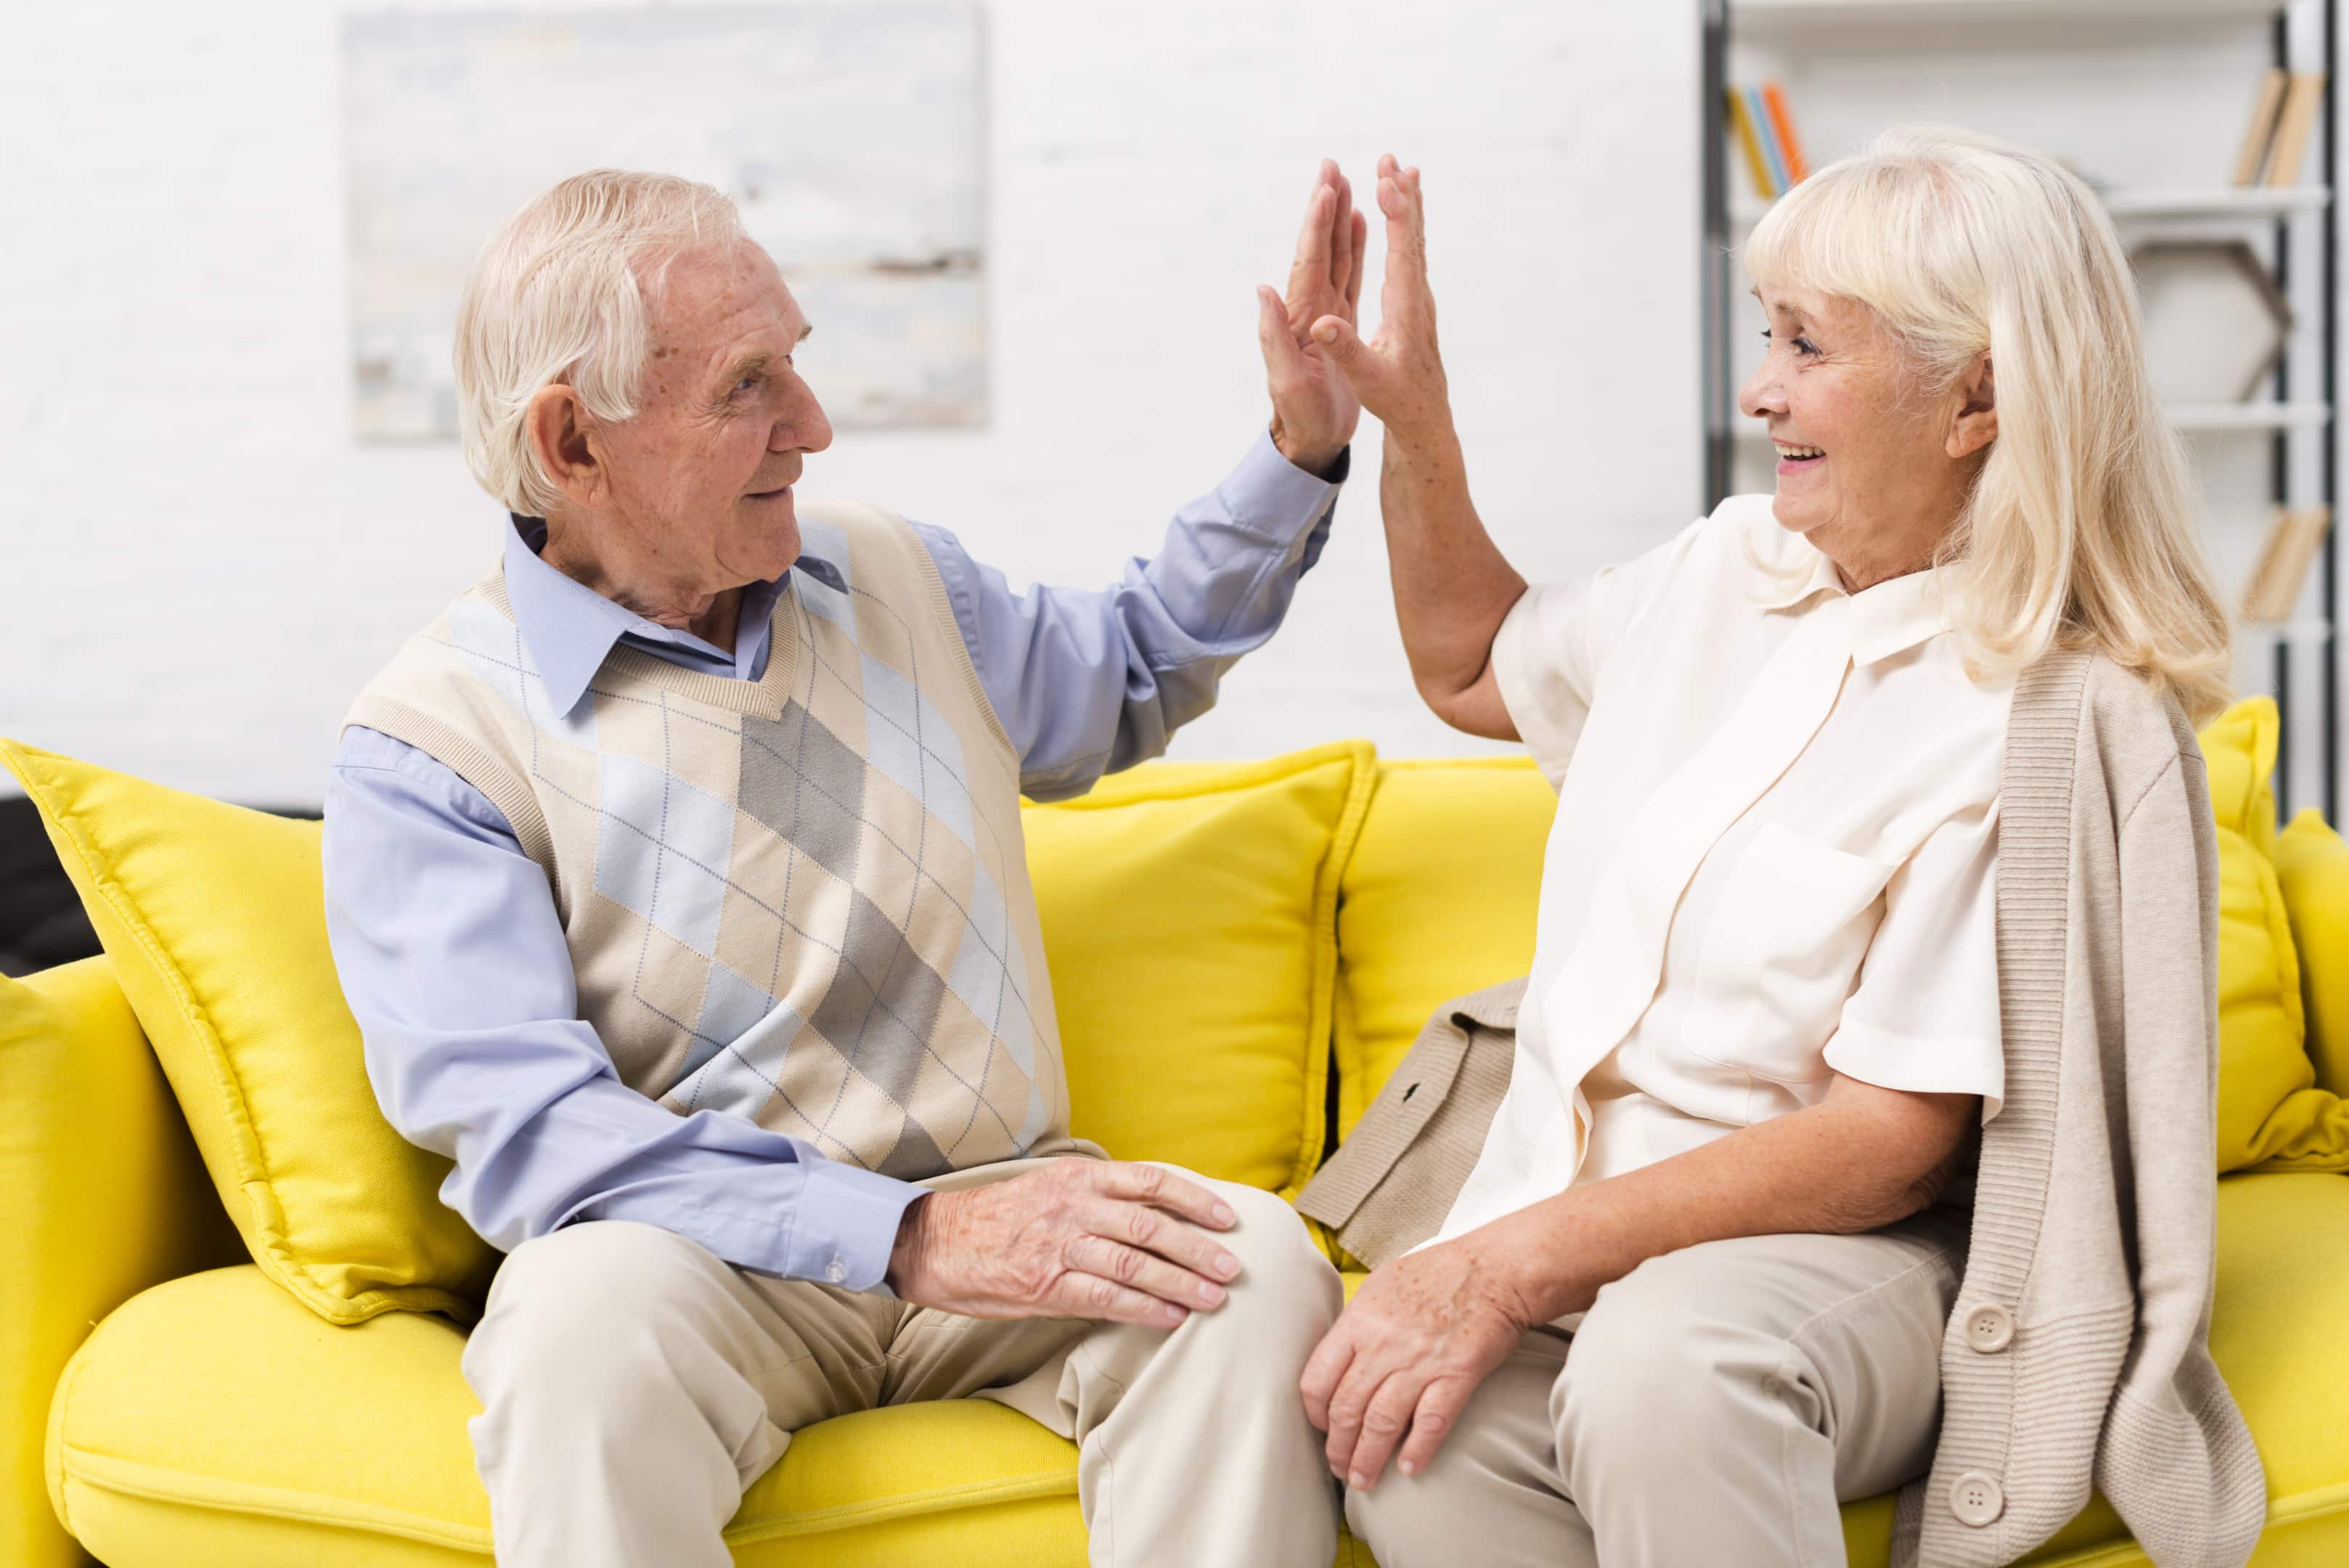 Old man and woman high fiving on yellow sofa